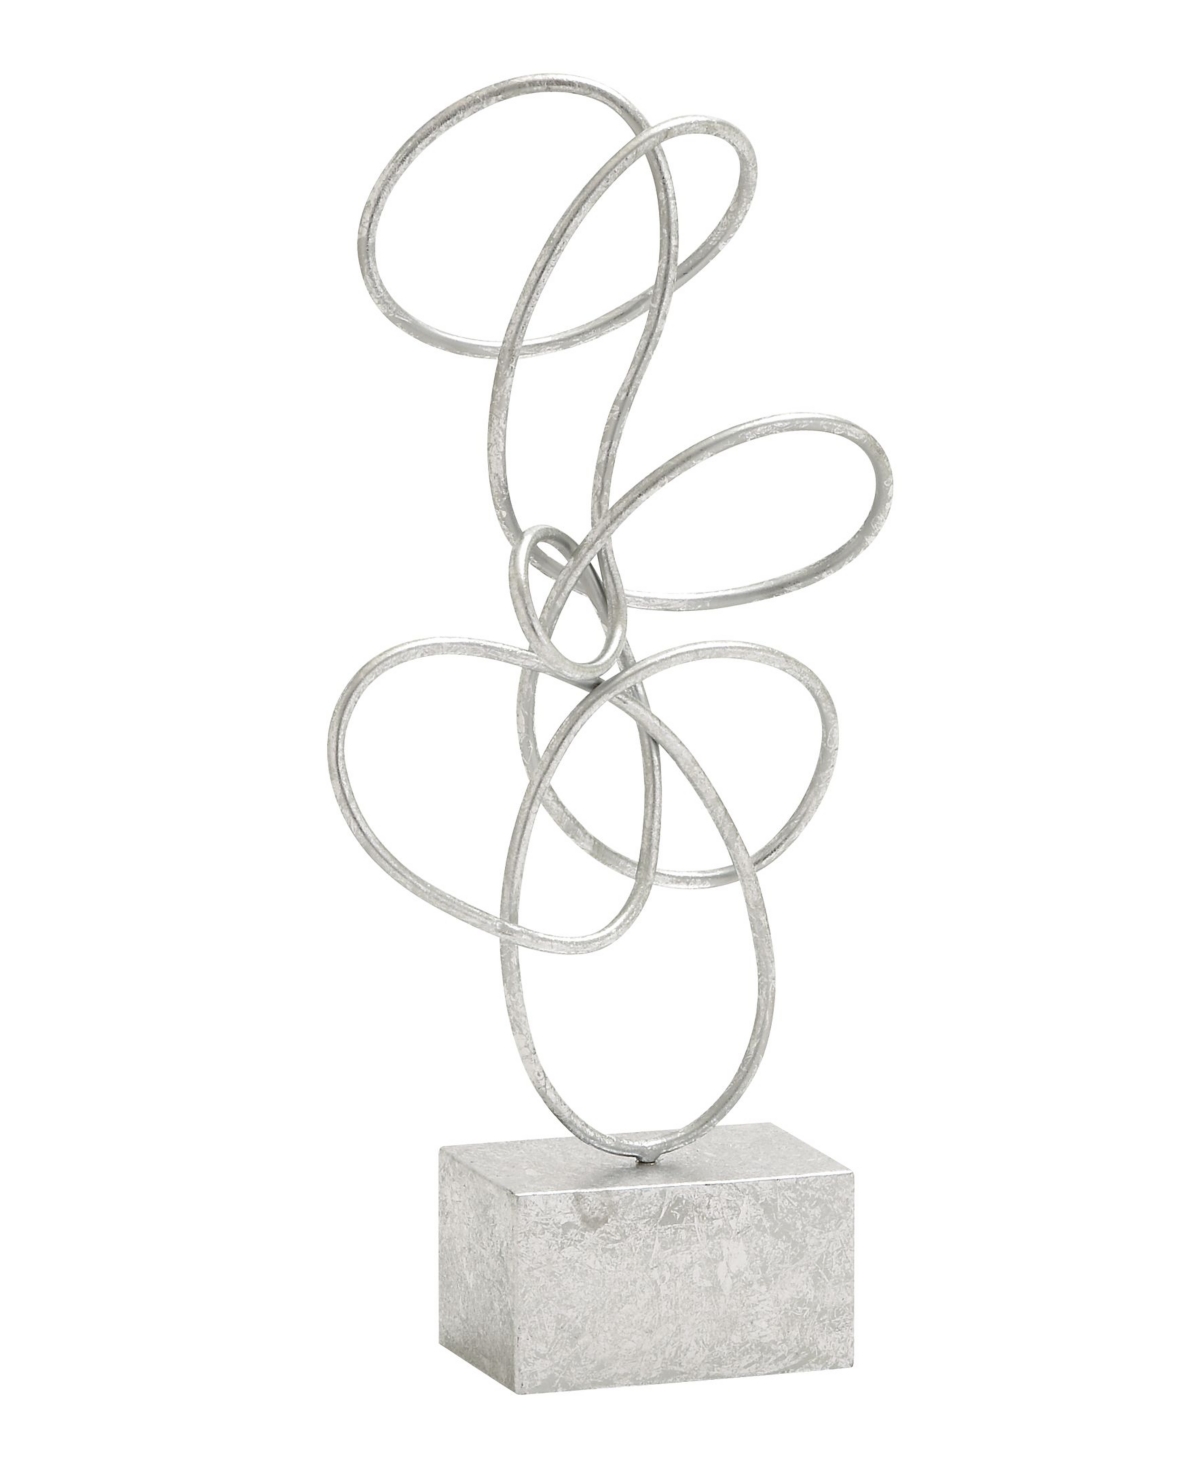 Rosemary Lane Metal Contemporary Abstract Sculpture, 22" X 10" In Silver-tone